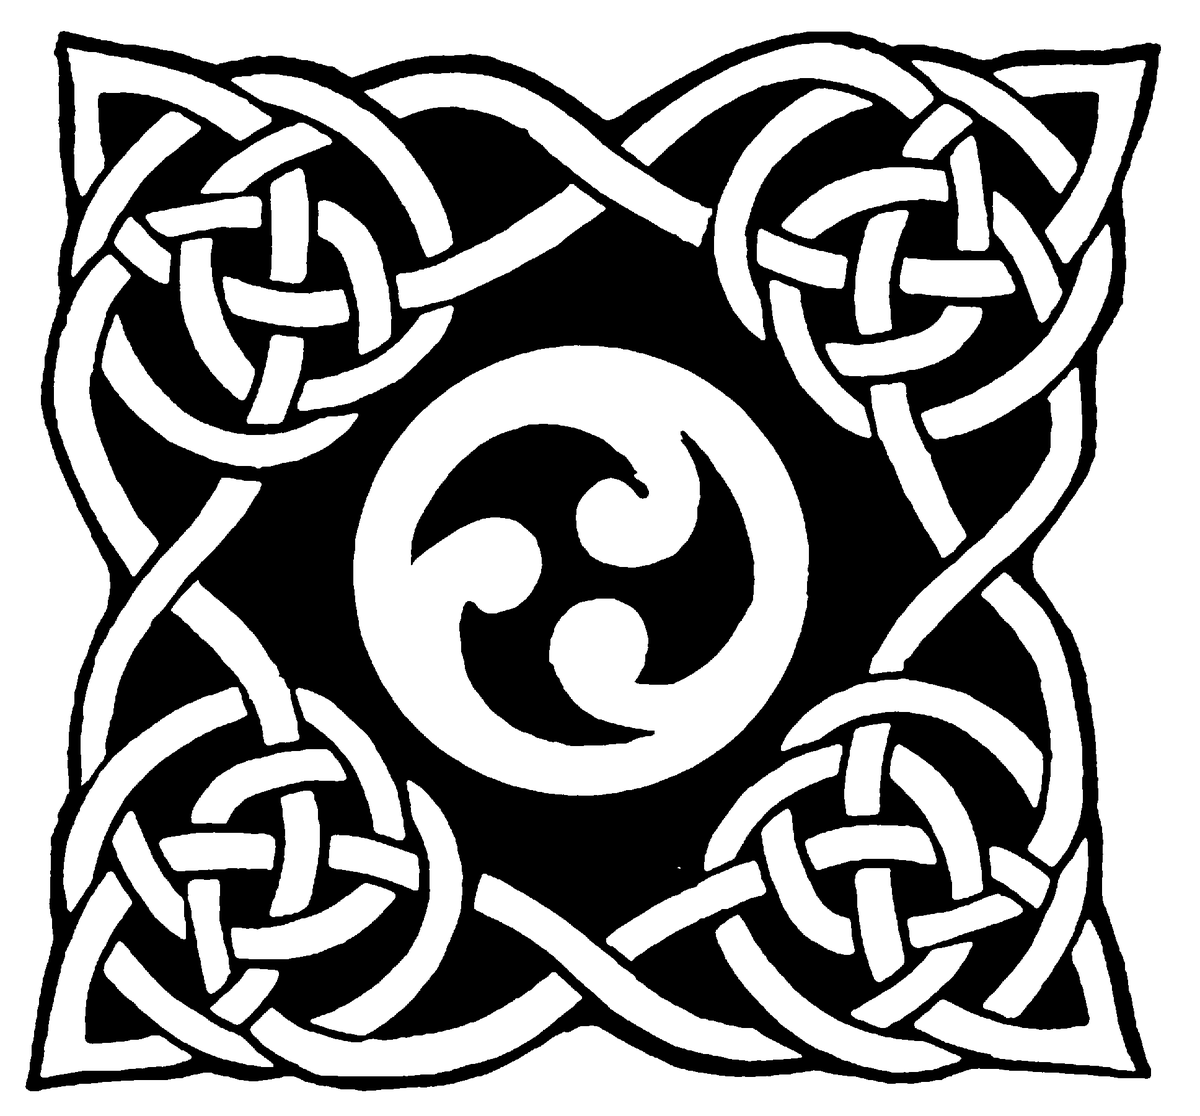 Celtic symbols often show repeating motifs, in this case the four directions and elements  are represented with three repeating shapes in the center of a circle, surrounded by a square representing sky, water and Earth.